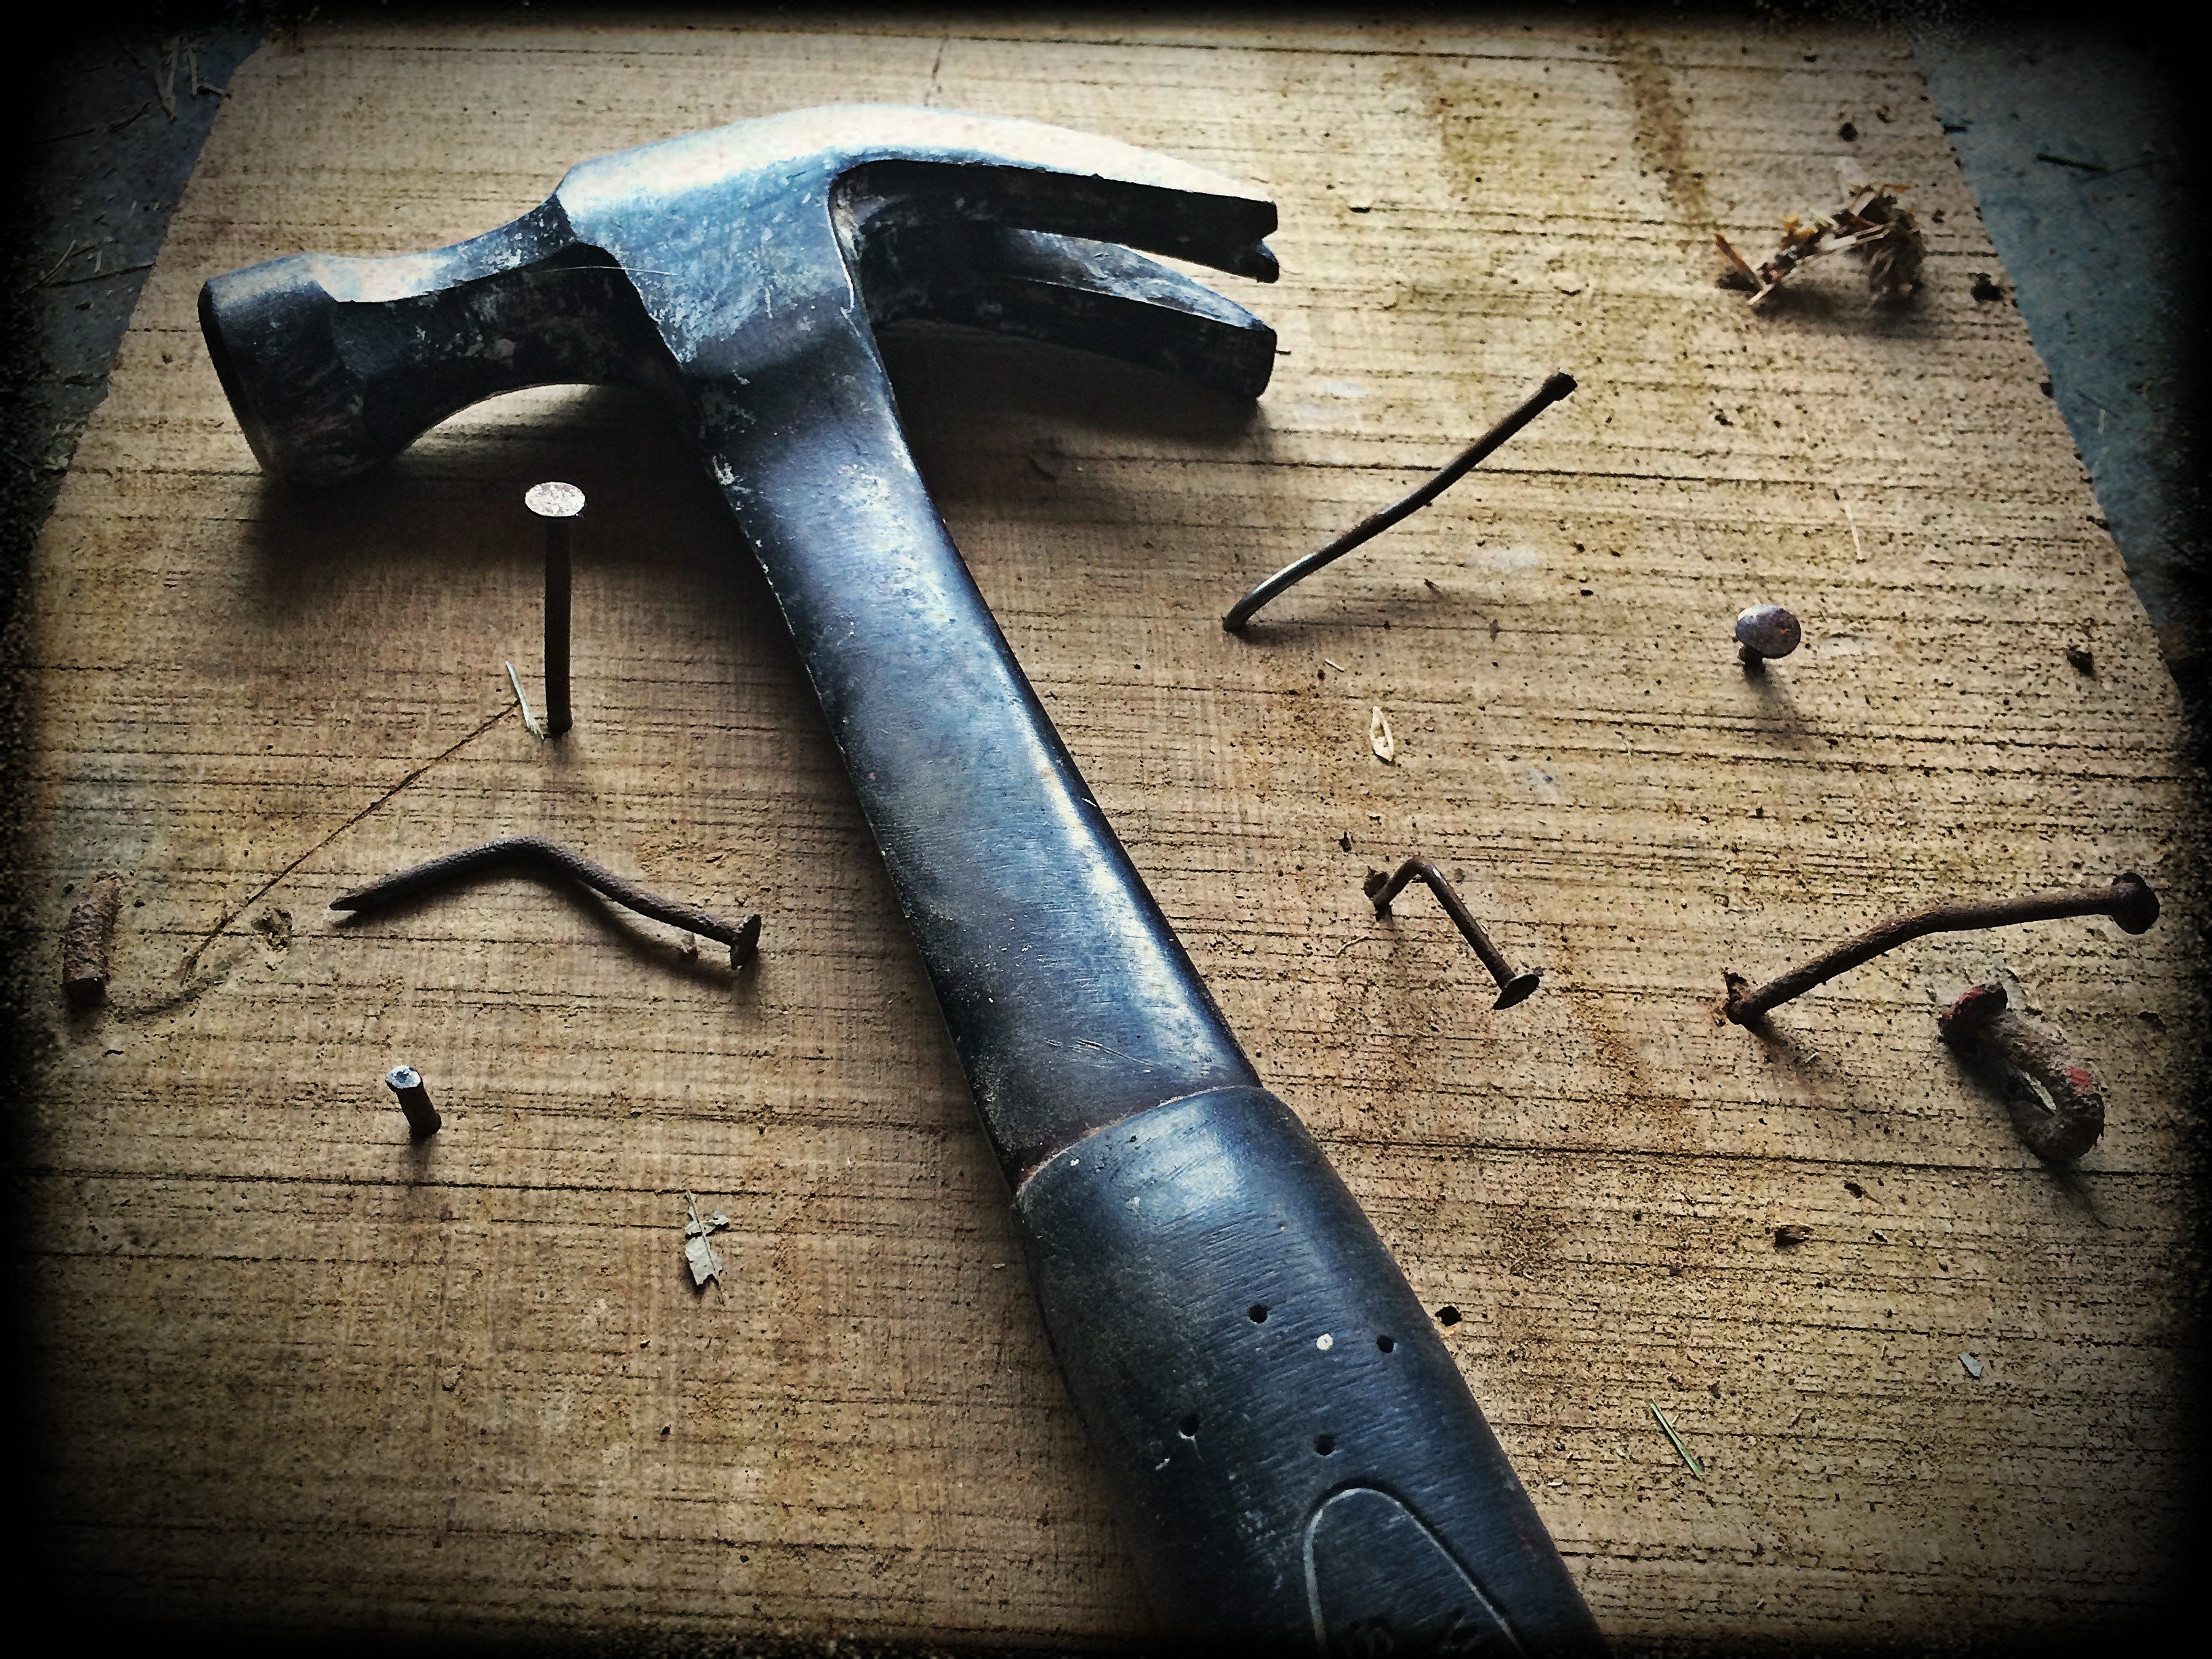 A hammer lying on a table surrounded by nails that were driven into the table with varying degrees of success